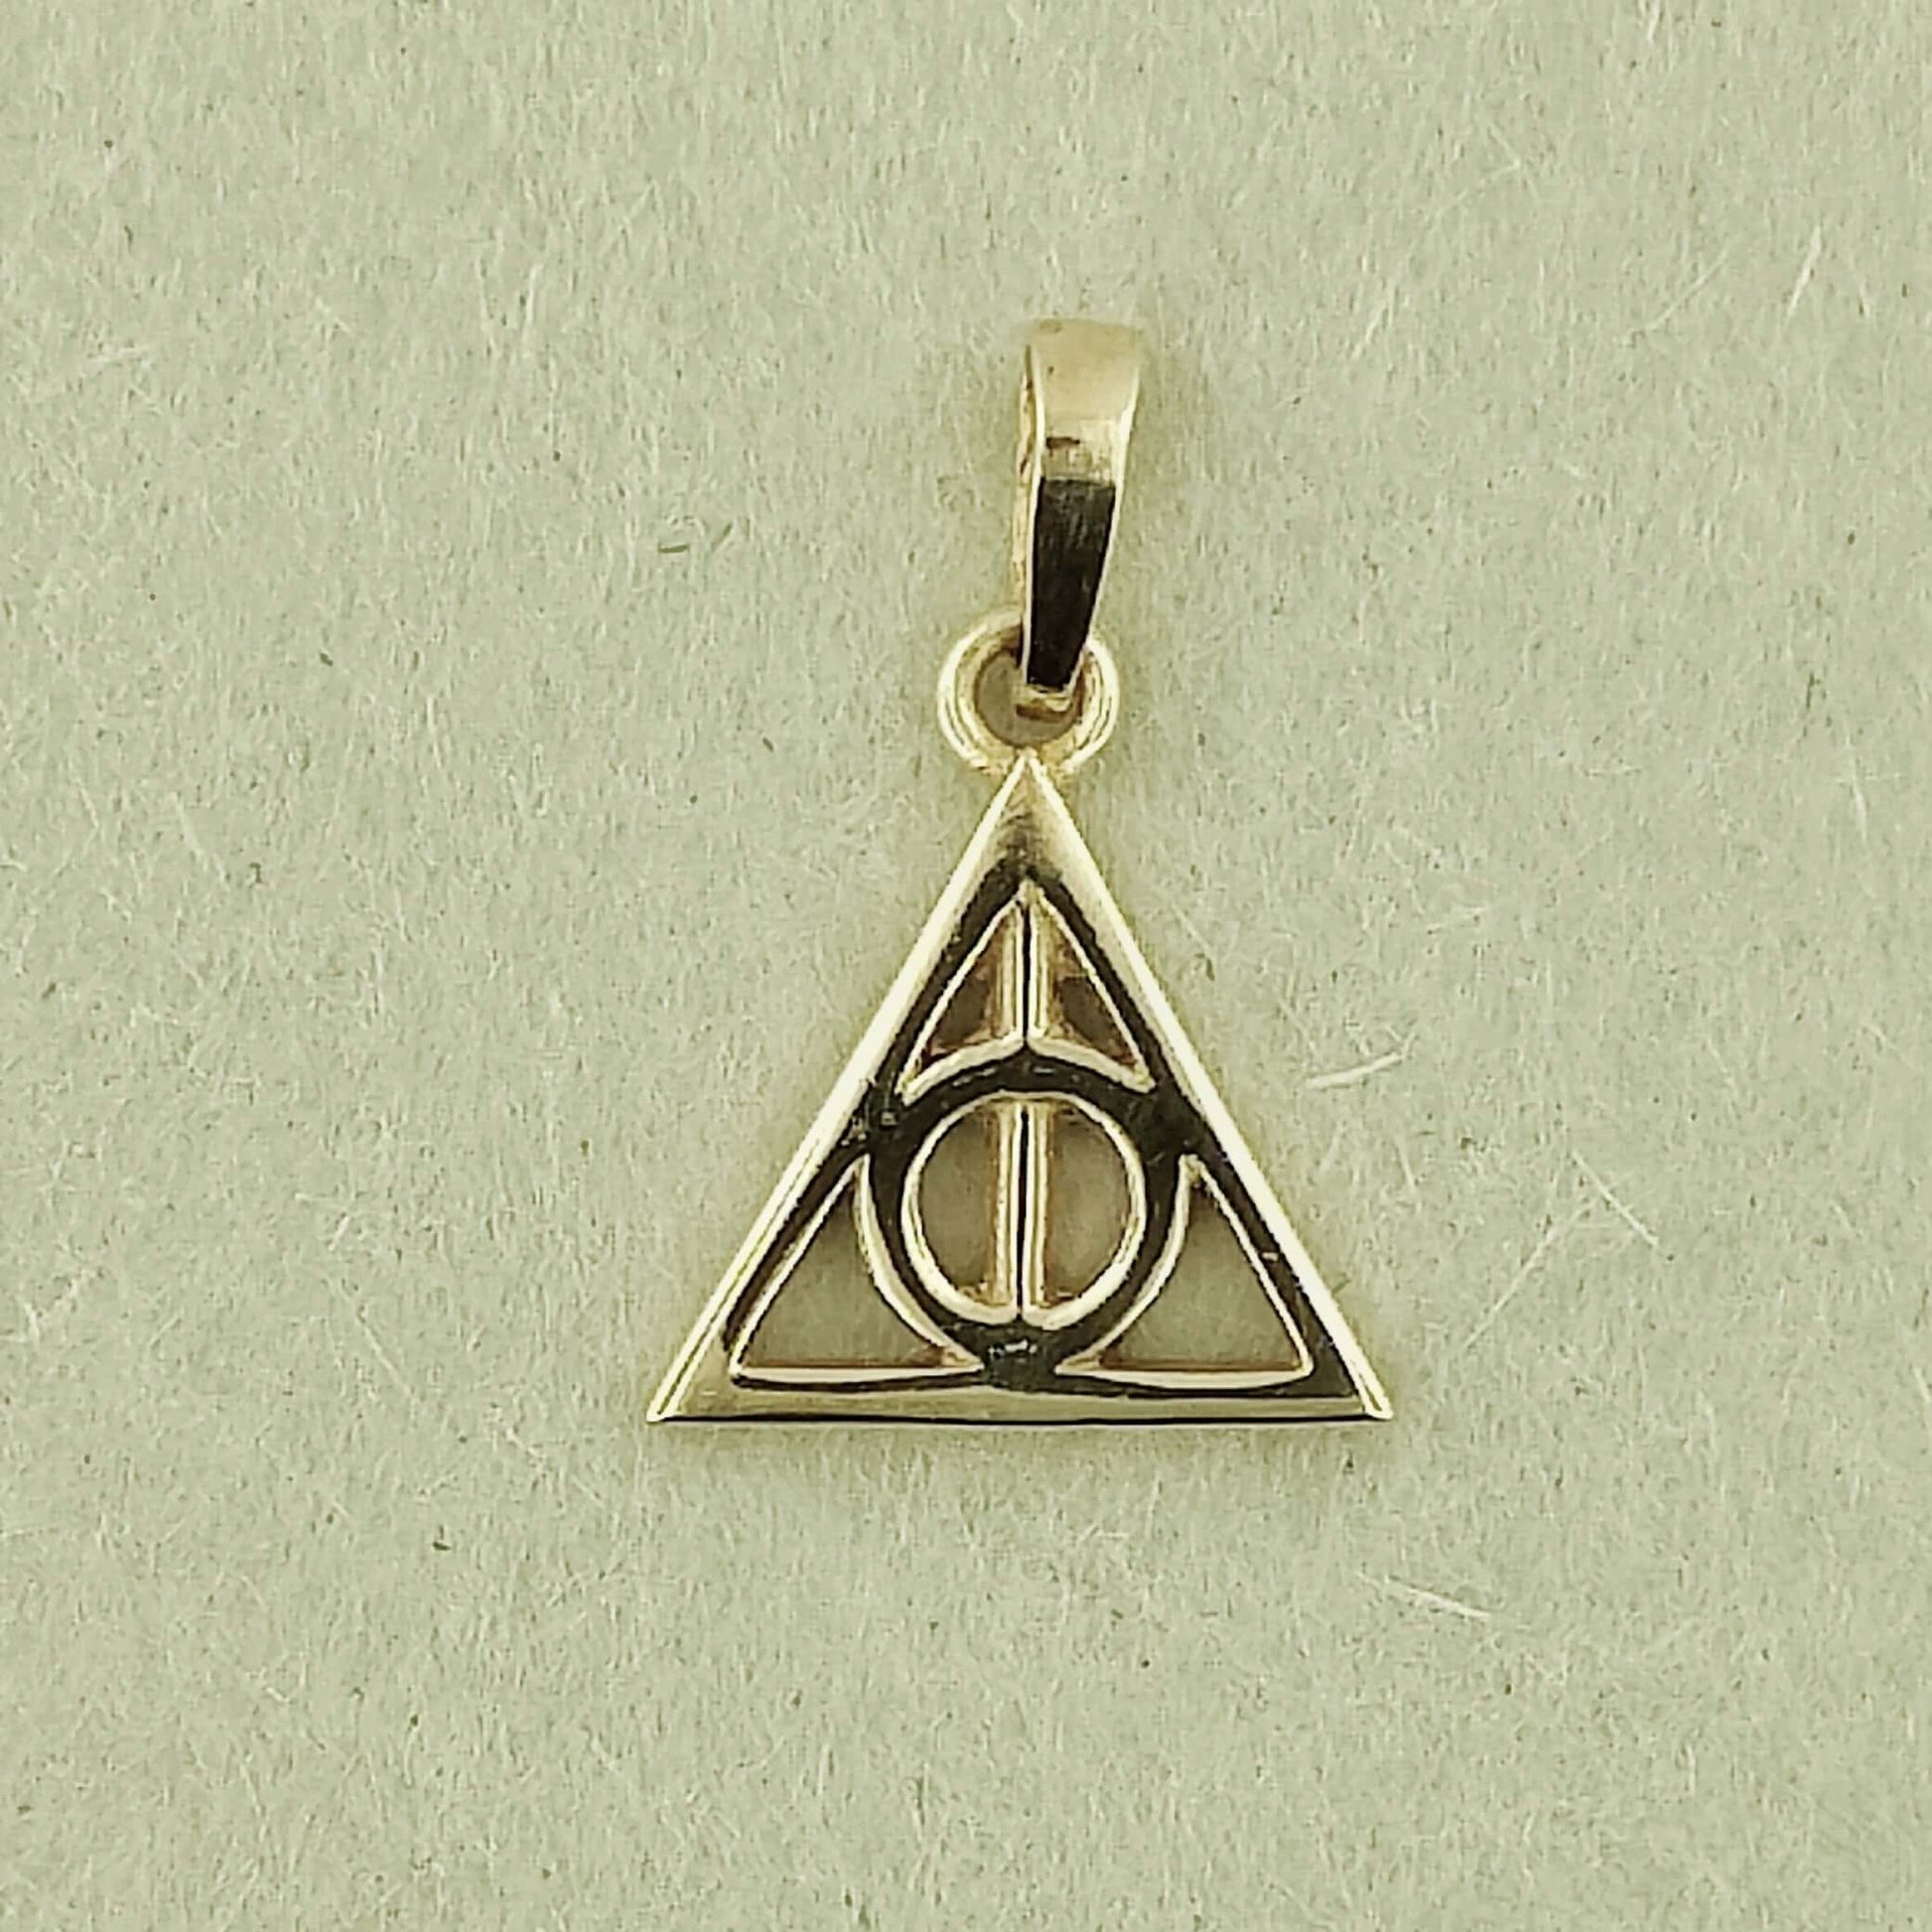 Deathly Wizard Charm Pendant in Sterling Silver or Bronze, Precious Metal Cosplay Jewelry, Precious Metal Cosplay Jewelery, Precious Metal Cosplay Jewellery, Precious Metal Geekery, Silver Wizard Charm, Deathly Hallows Pendant, Silver Geek Jewellery, Bronze Geek Jewellery, Geeky Gift For Her, Geeky Christmas Gift, Bronze Geek Pendant, Silver Geek Pendant